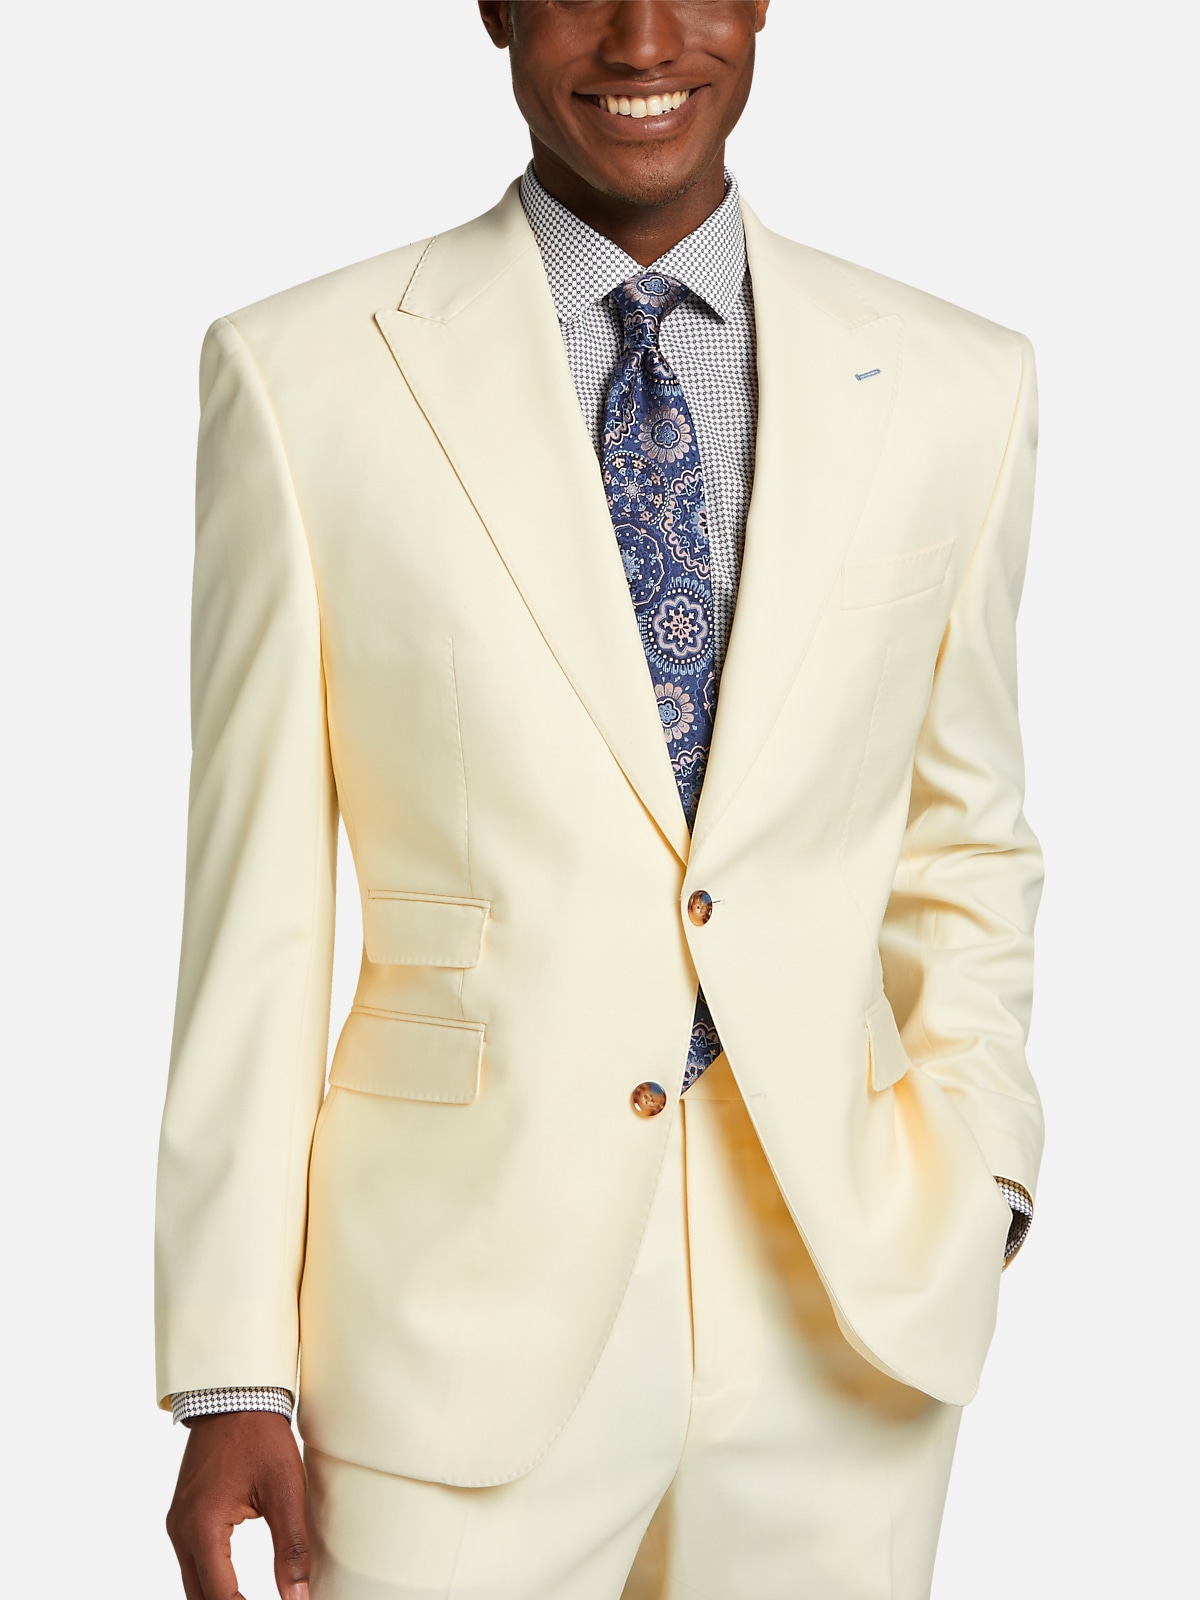 https://image.menswearhouse.com/is/image/TMW/TMW_3W9E_25_TAYION_SUIT_SEPARATE_JACKETS_CREAM_MAIN?imPolicy=pdp-zoom-mob